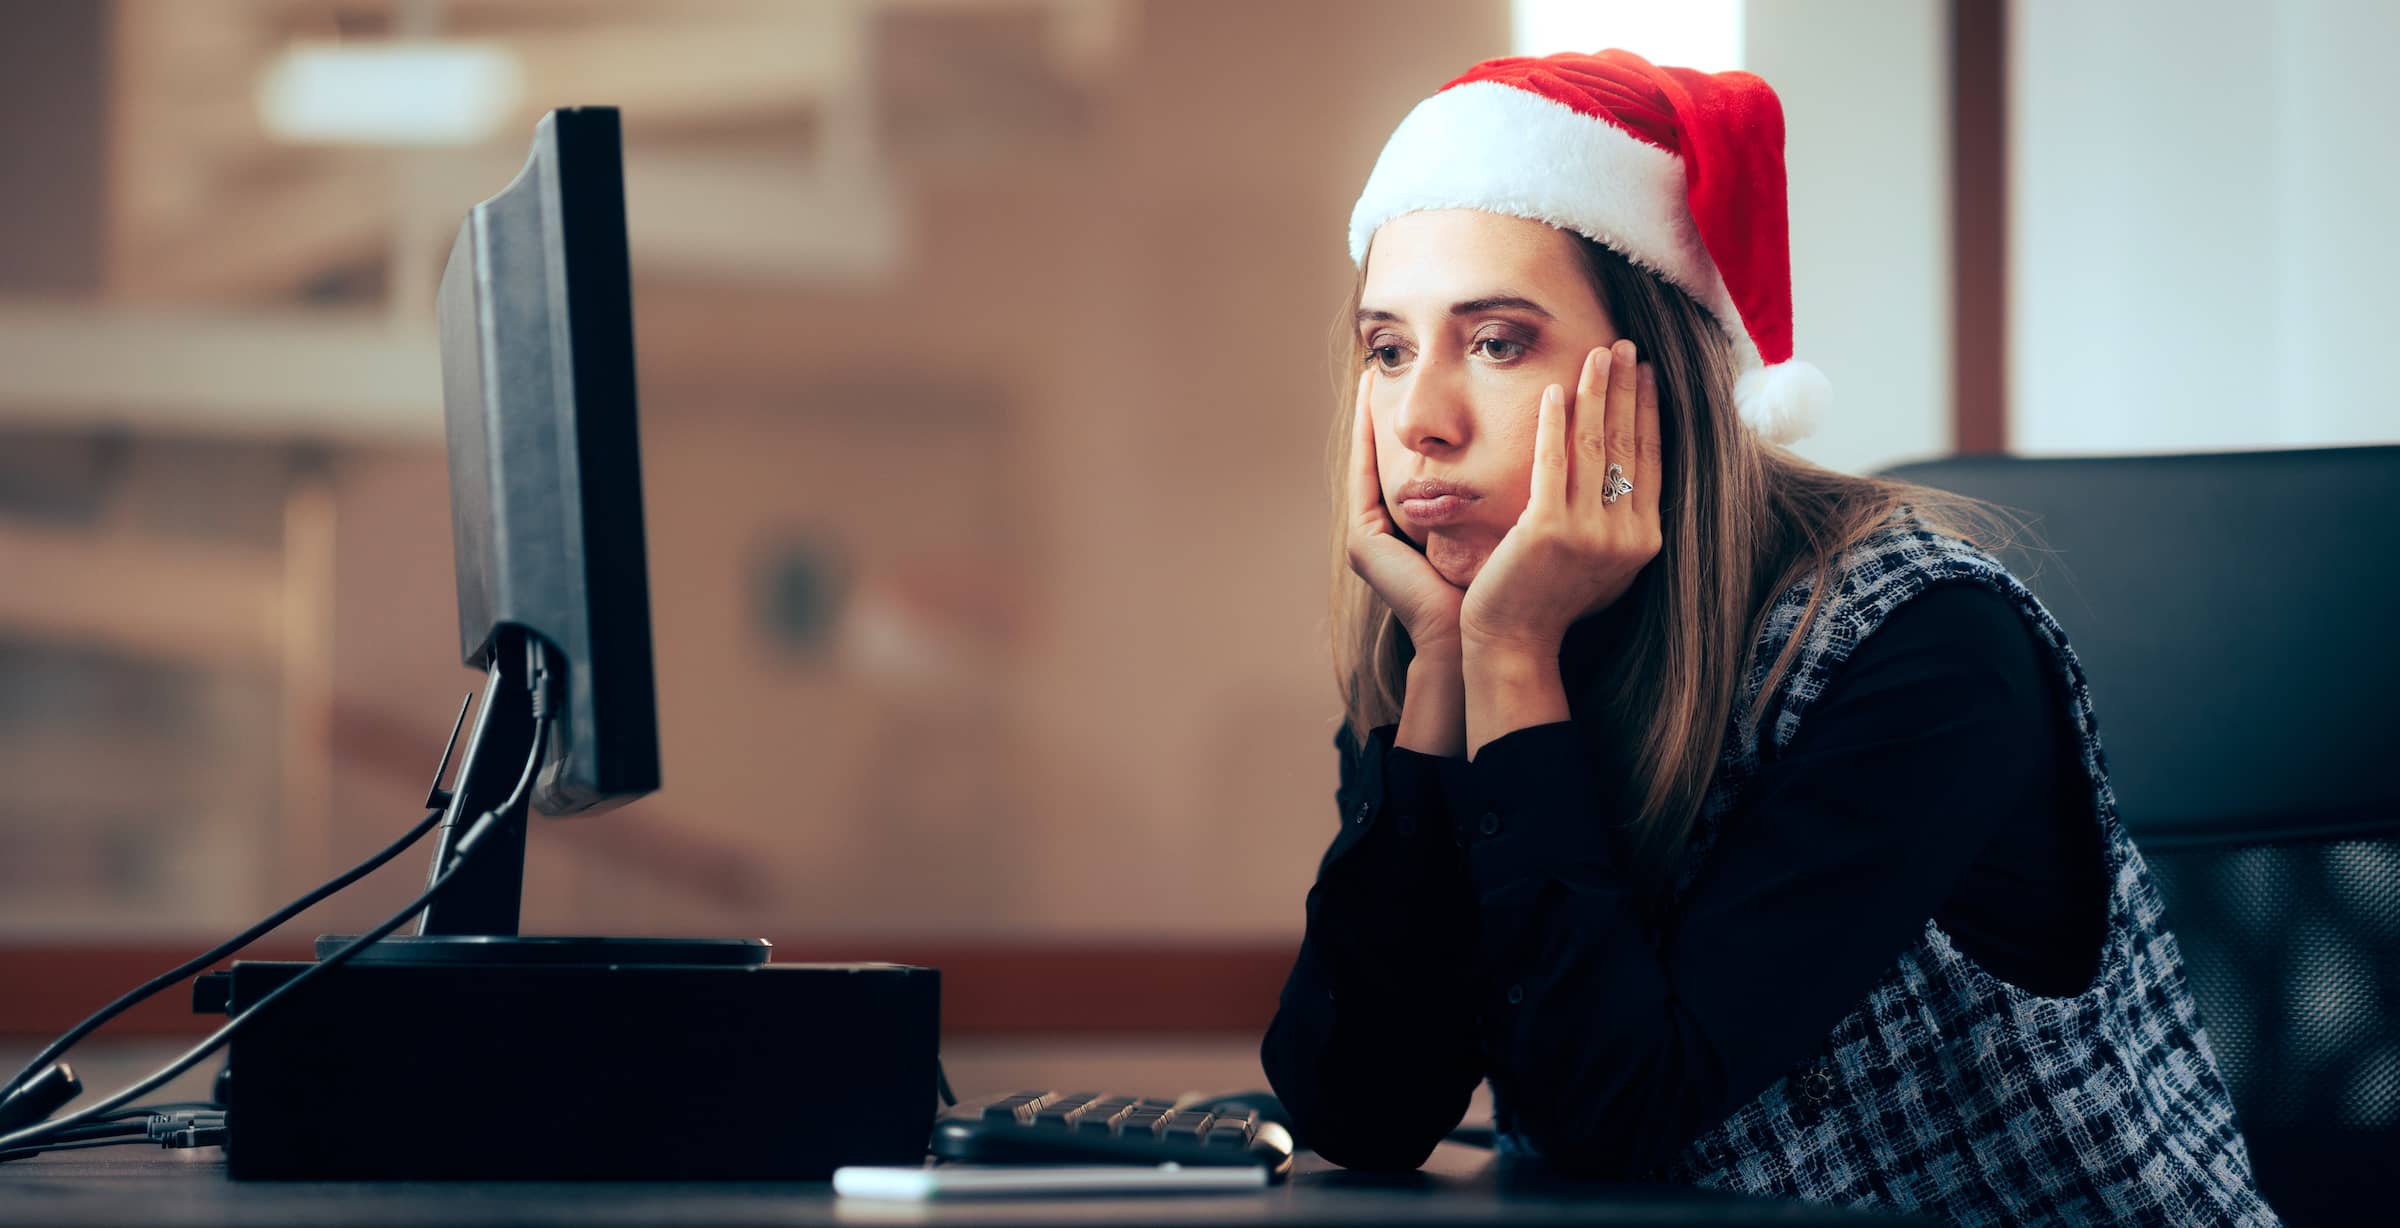 Stressed worker spending time overworking during winter holidays